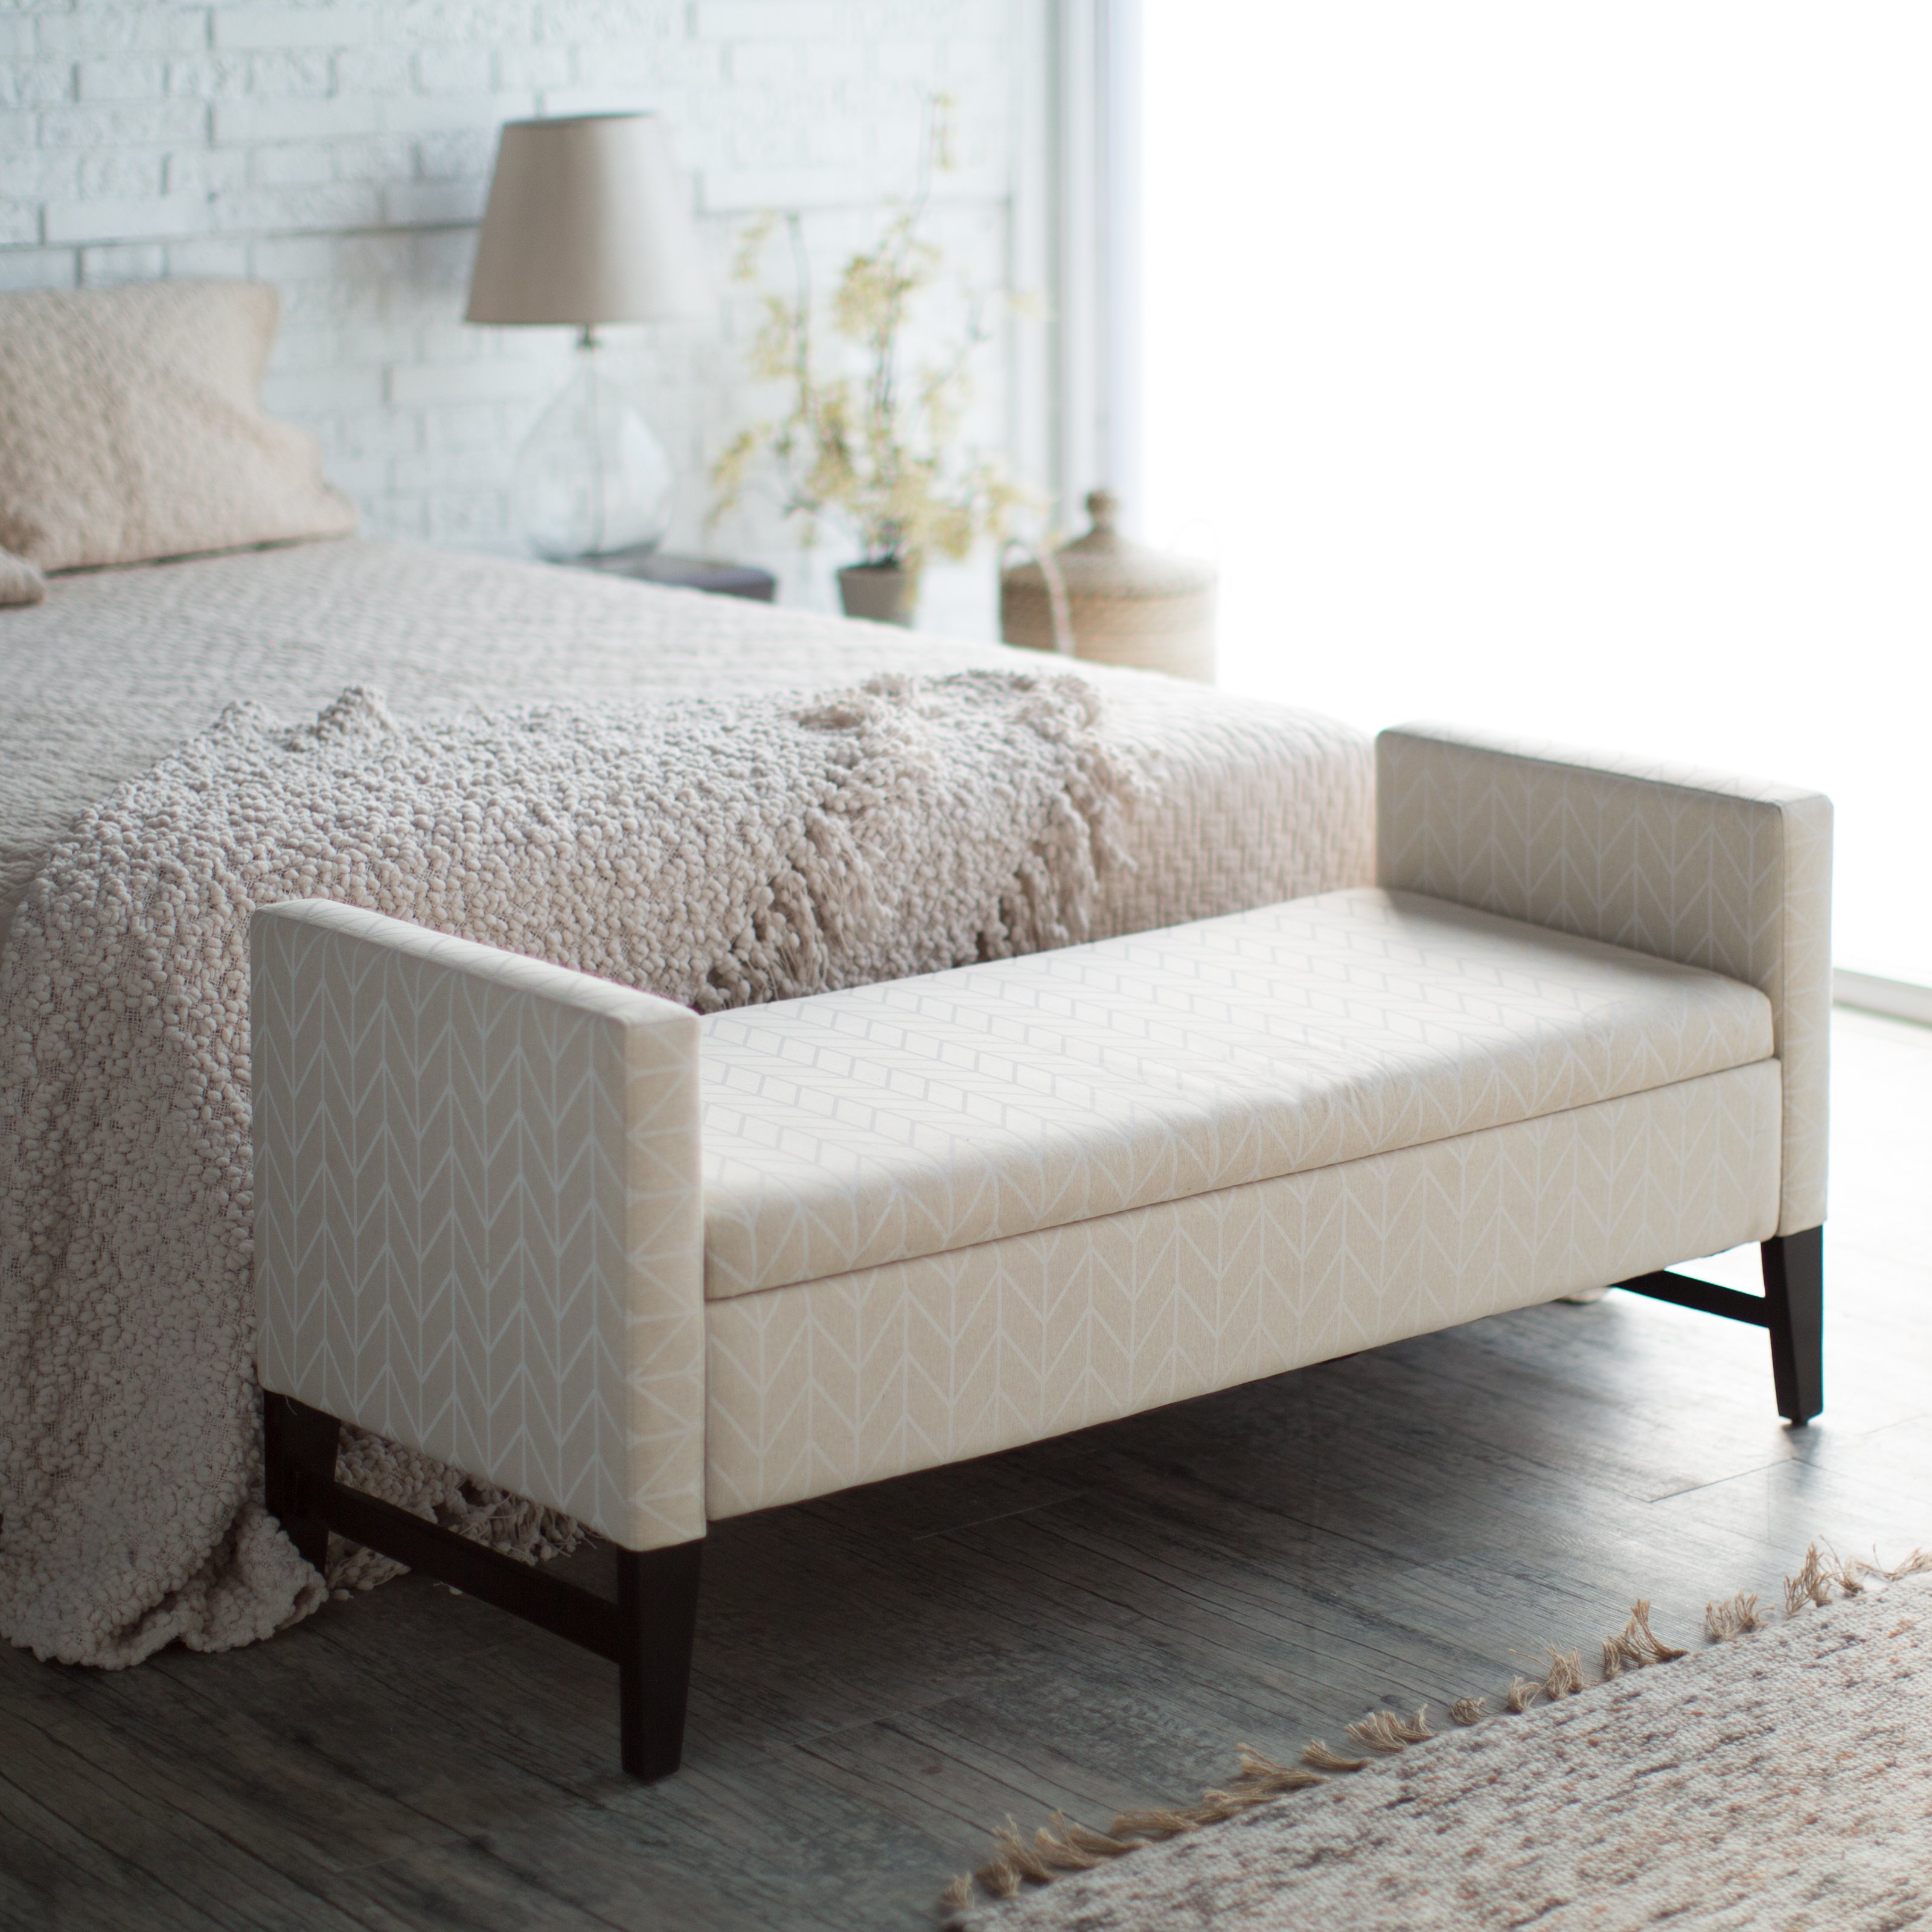 Reinventing Your Bedroom With An Upholstered Bench